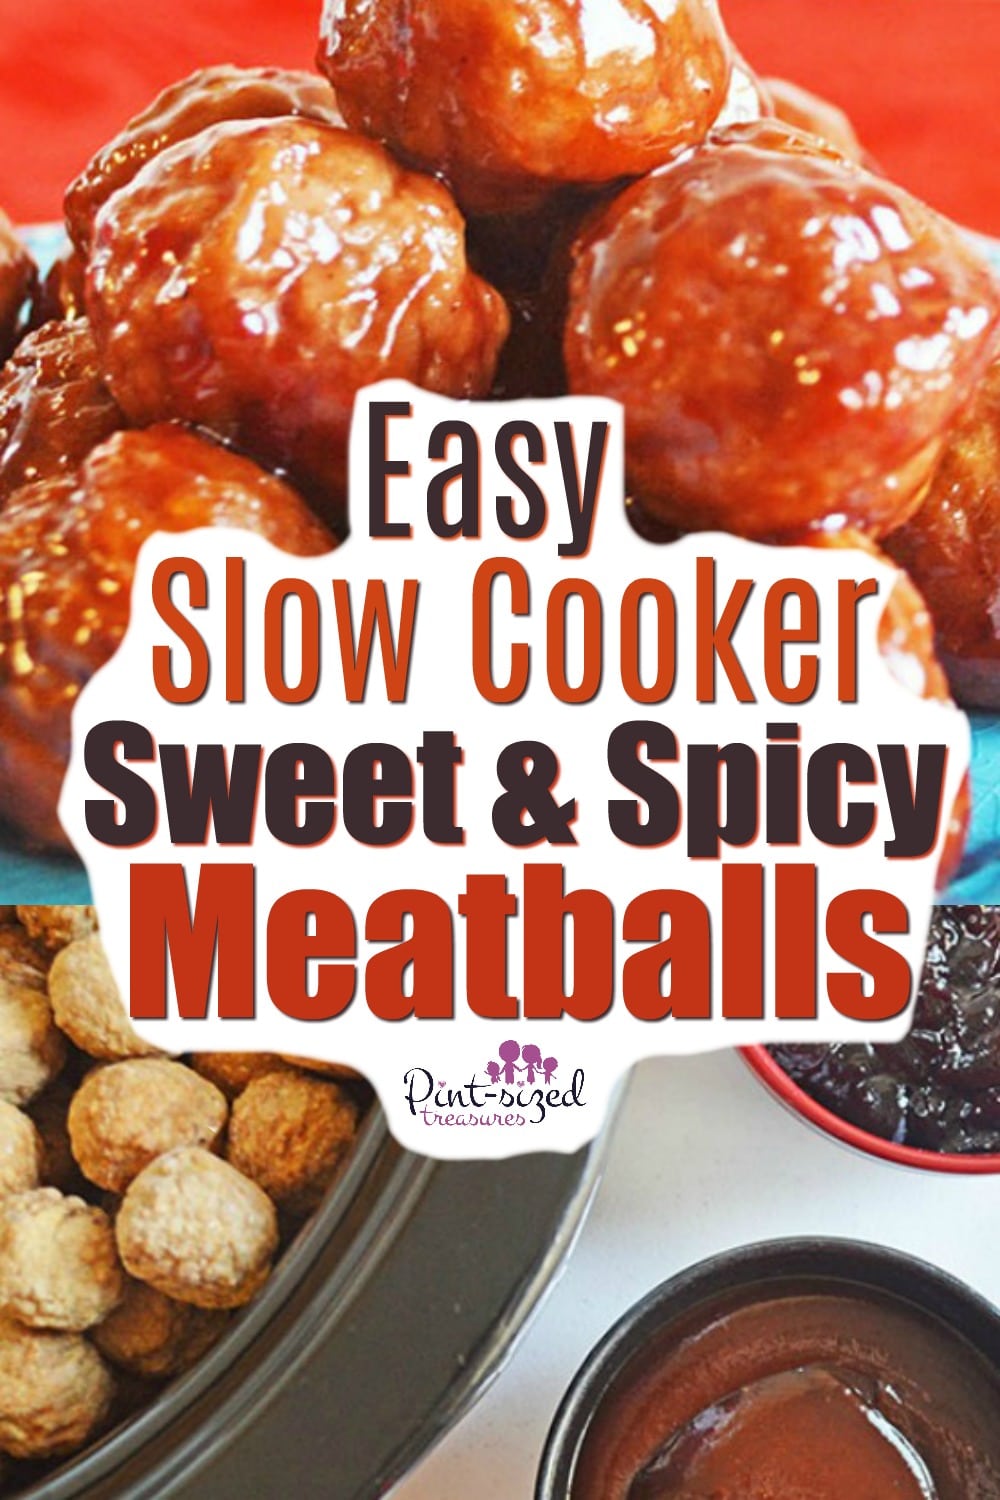 Sweet and Spicy meatballs are tossed int he slow cooker using ready-made meatballs and a handful of ingredient! It's seriously one of the easiest, sweet and spicy meatball recipe you'll ever try! Plus, it's the perfect appetizer for a party!